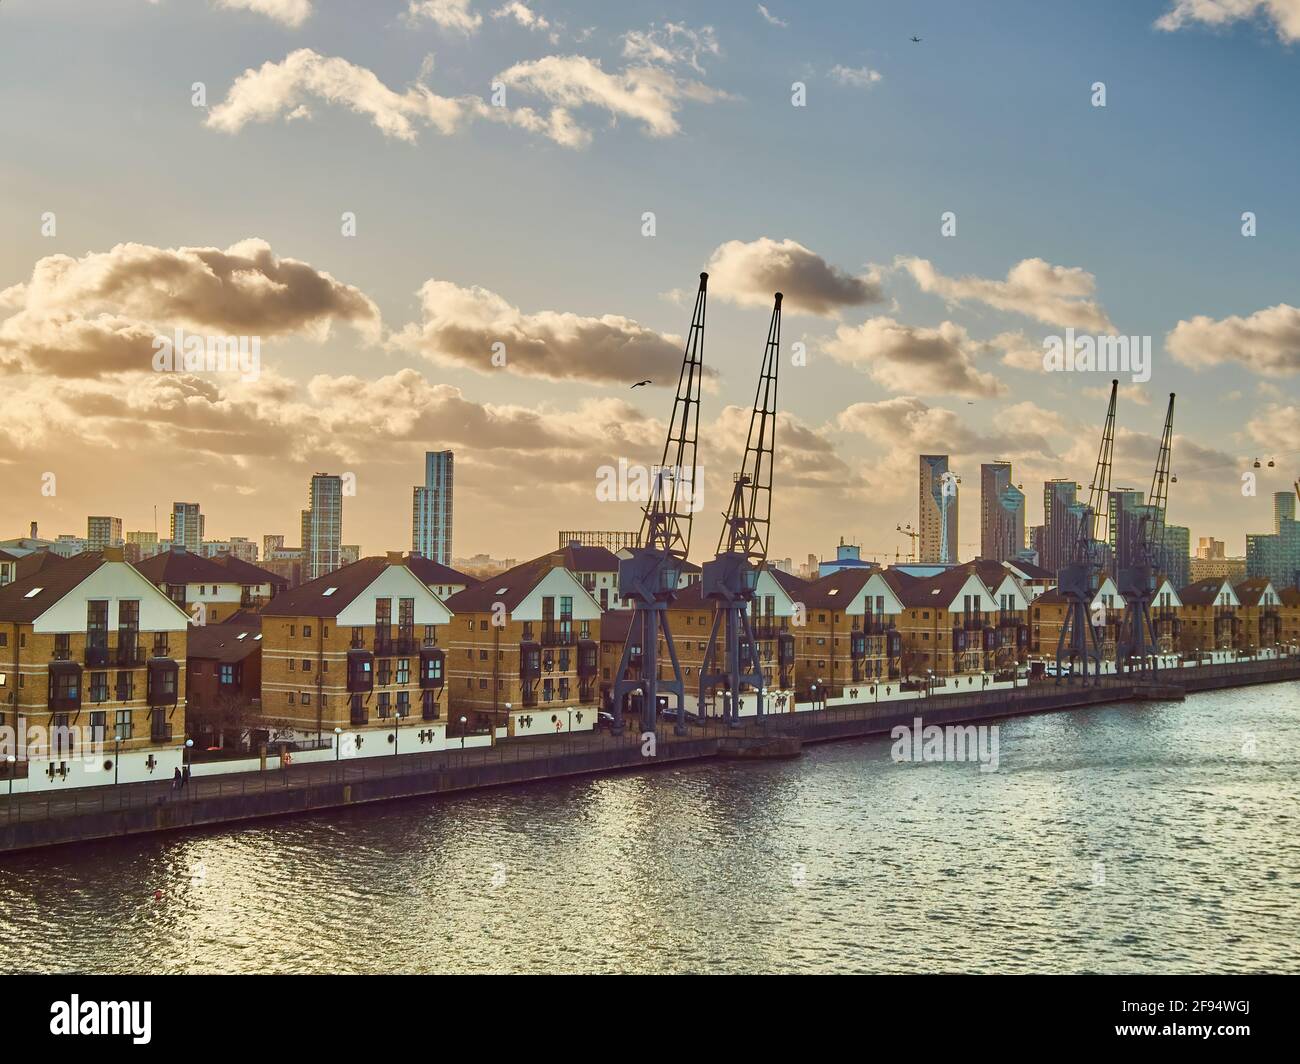 London UK Dec 2019- An old dockside, now redeveloped to aspirational residential properties as part of a gentrification project, with a wider city sky Stock Photo